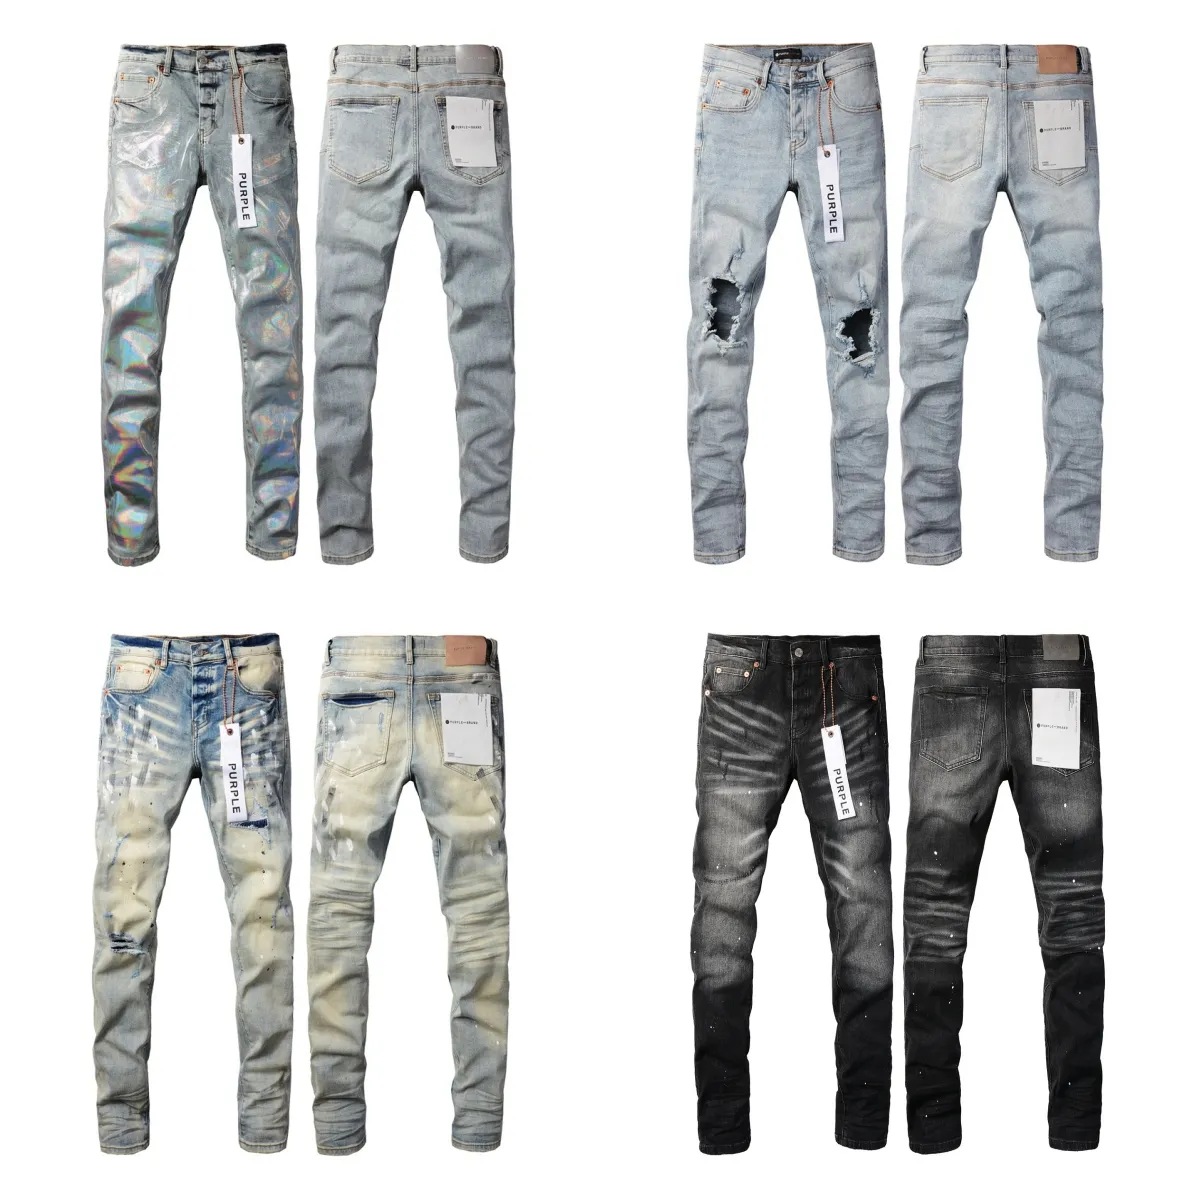 Purple Jeans Mens Designer Jeans High-quality Jeans Fashion Jeans for Mens High-end Distressed Ripped Bikers Womens Denim Pants Cargo for Men Black Jeans